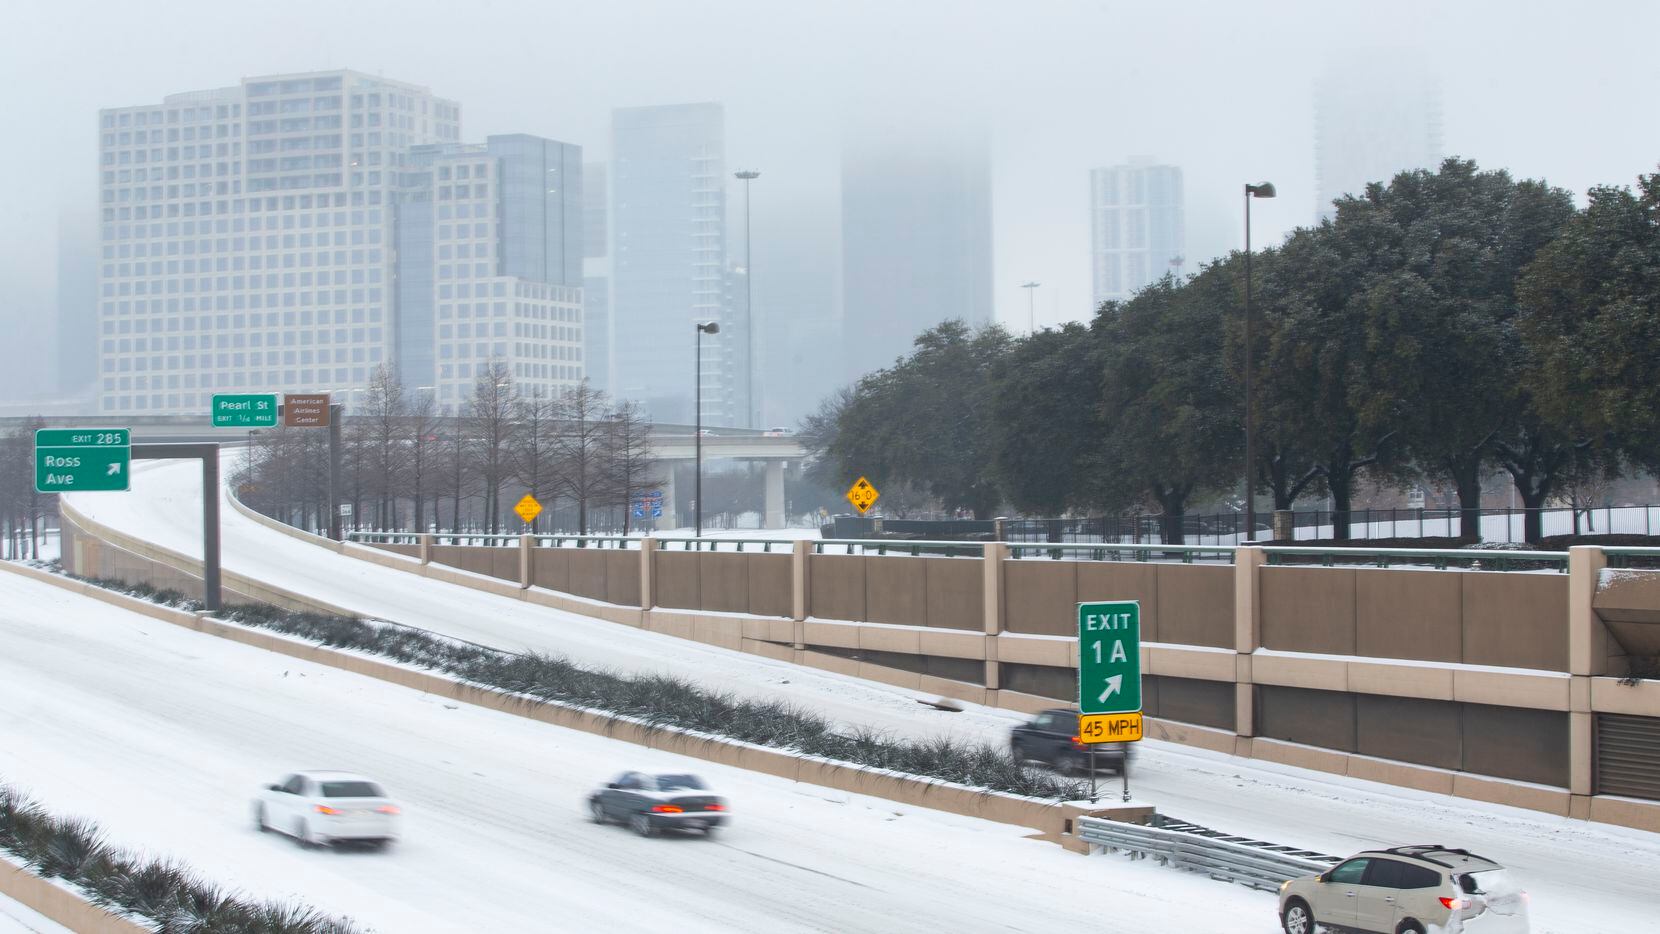 A foggy downtown and stalled car seen on a snowy and icy North Central Expressway in Dallas...